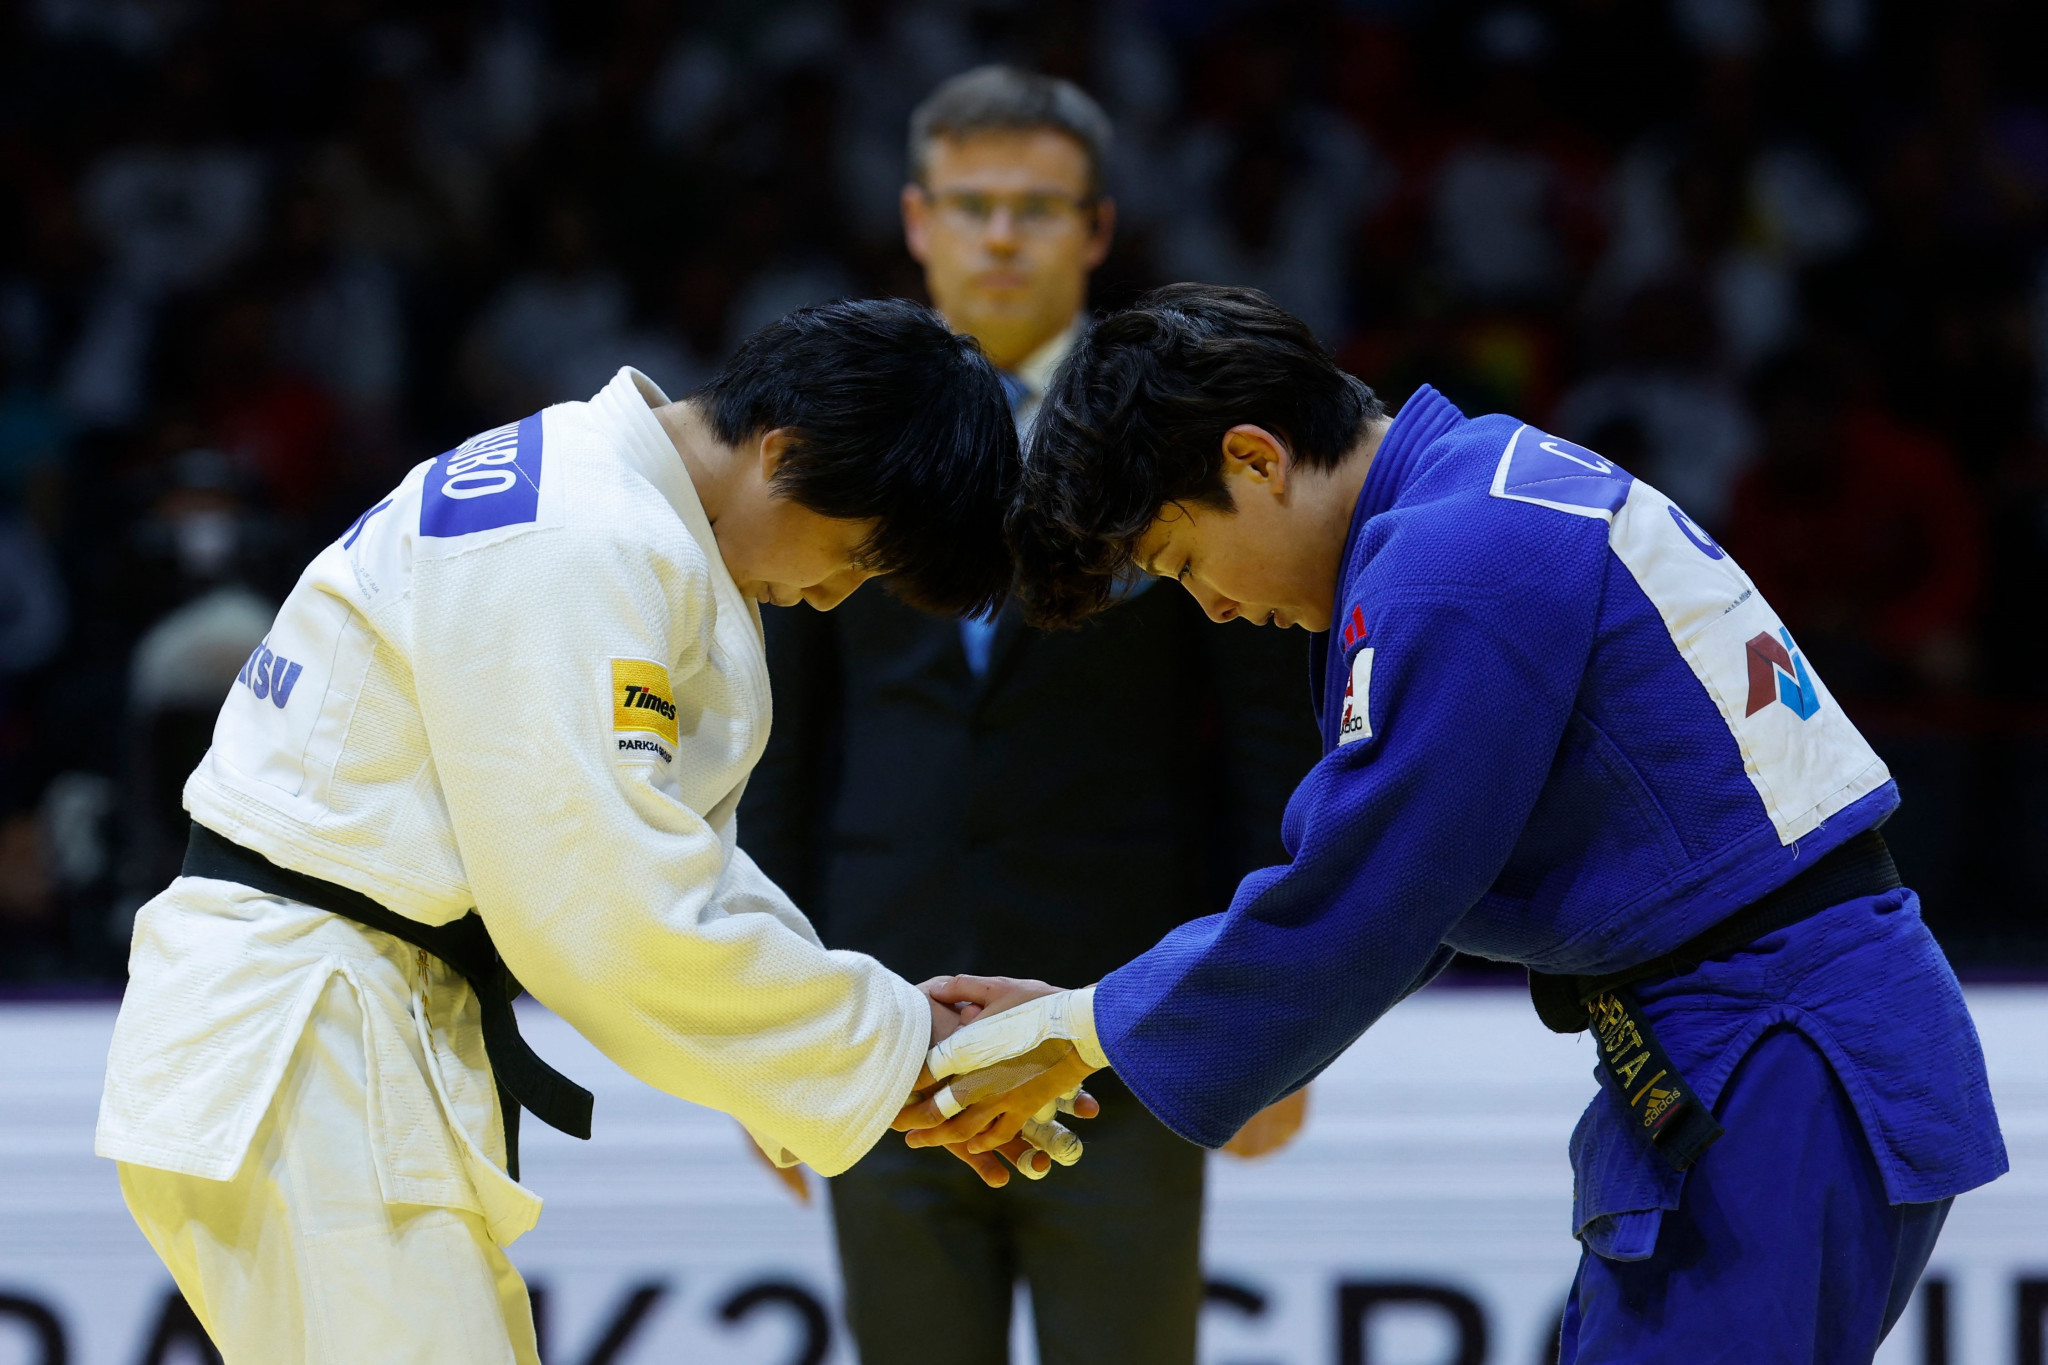 Canada’s Christa Deguchi, left, defeated Japan's Haruka Funakubo, right, in the women's under-57kg final ©Getty Images